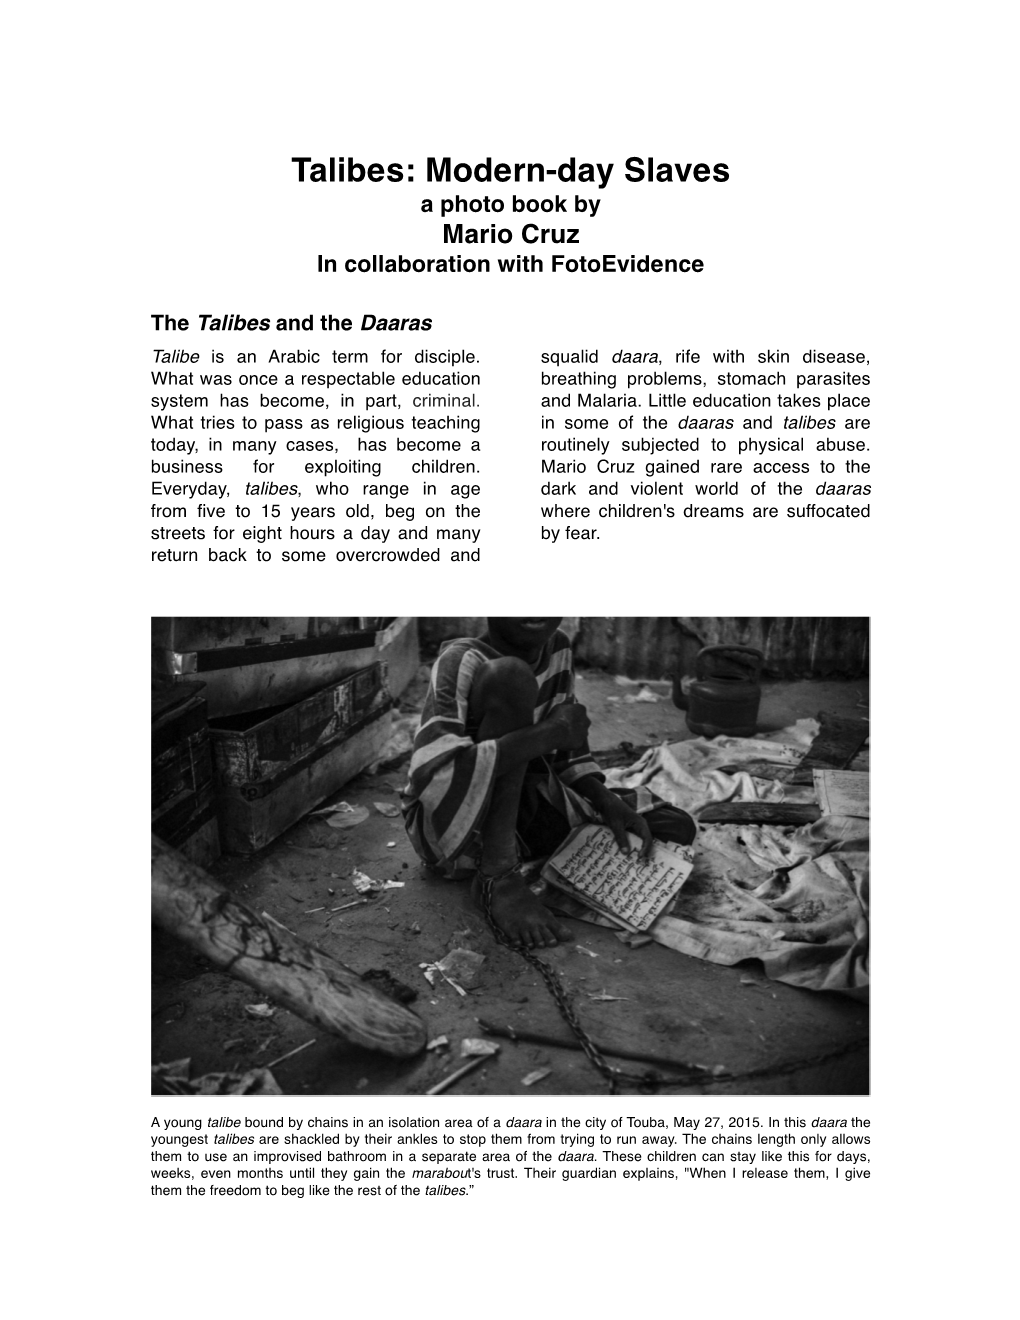 Talibes: Modern-Day Slaves a Photo Book by Mario Cruz in Collaboration with Fotoevidence